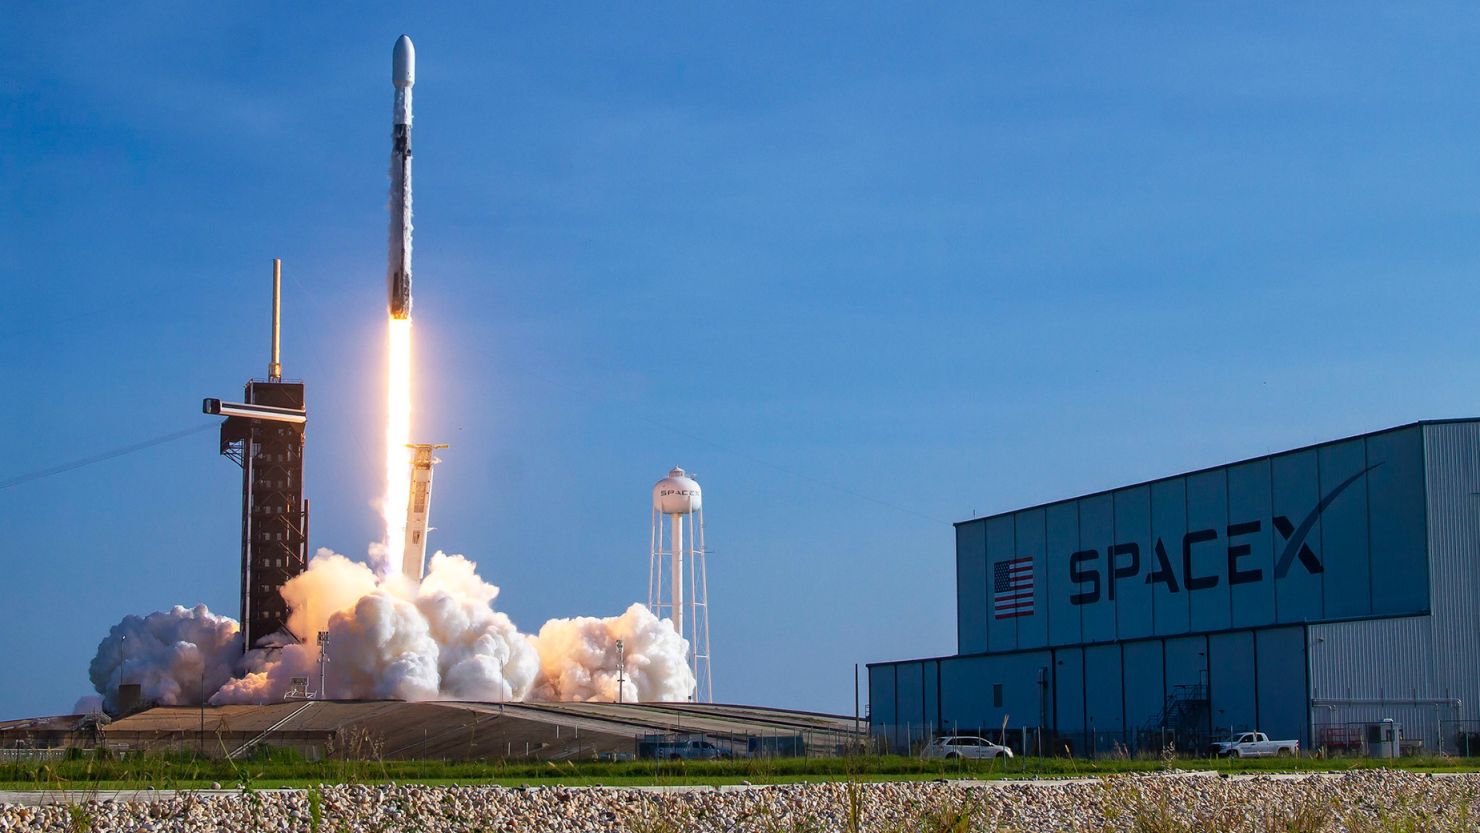 SpaceX to in-house mass production of Starlink internet satellite